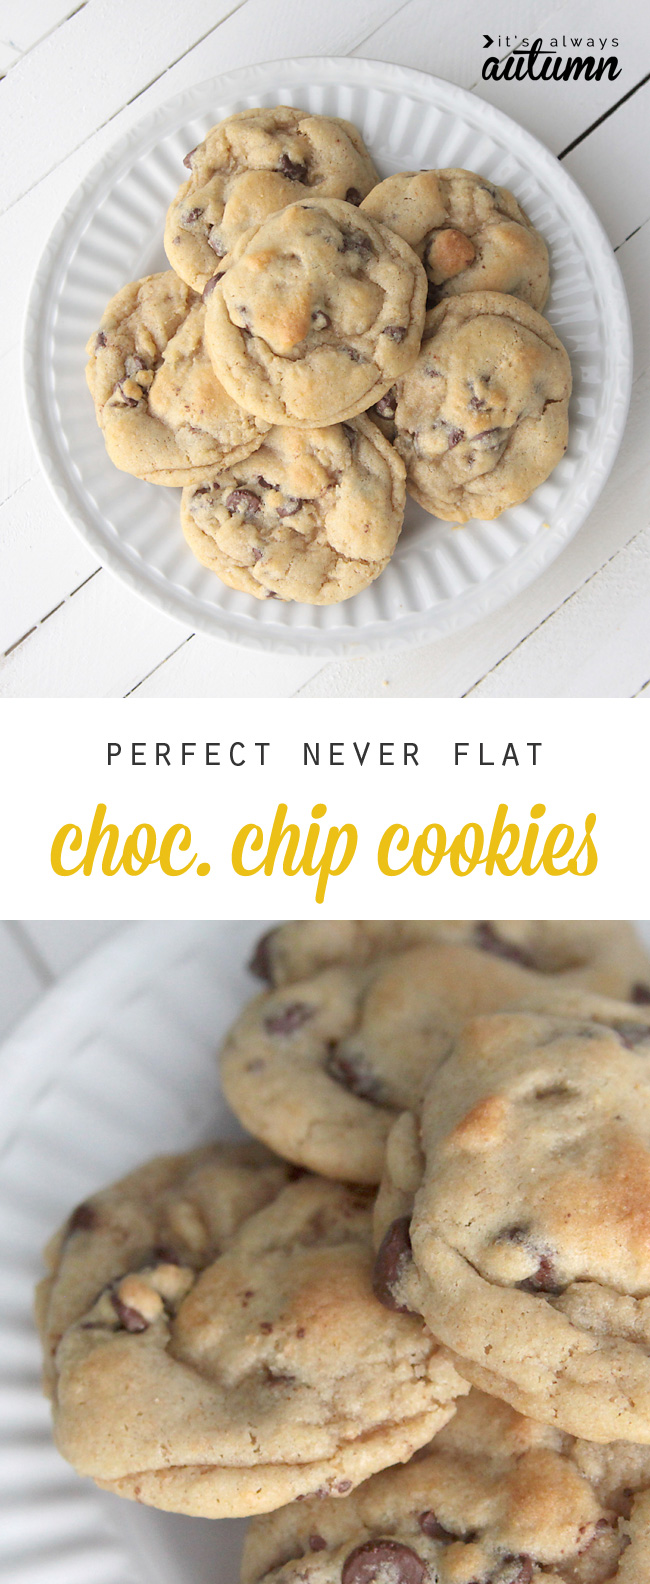 This recipe makes the best chocolate chip cookies! They're always chewy and delicious and they never go flat.